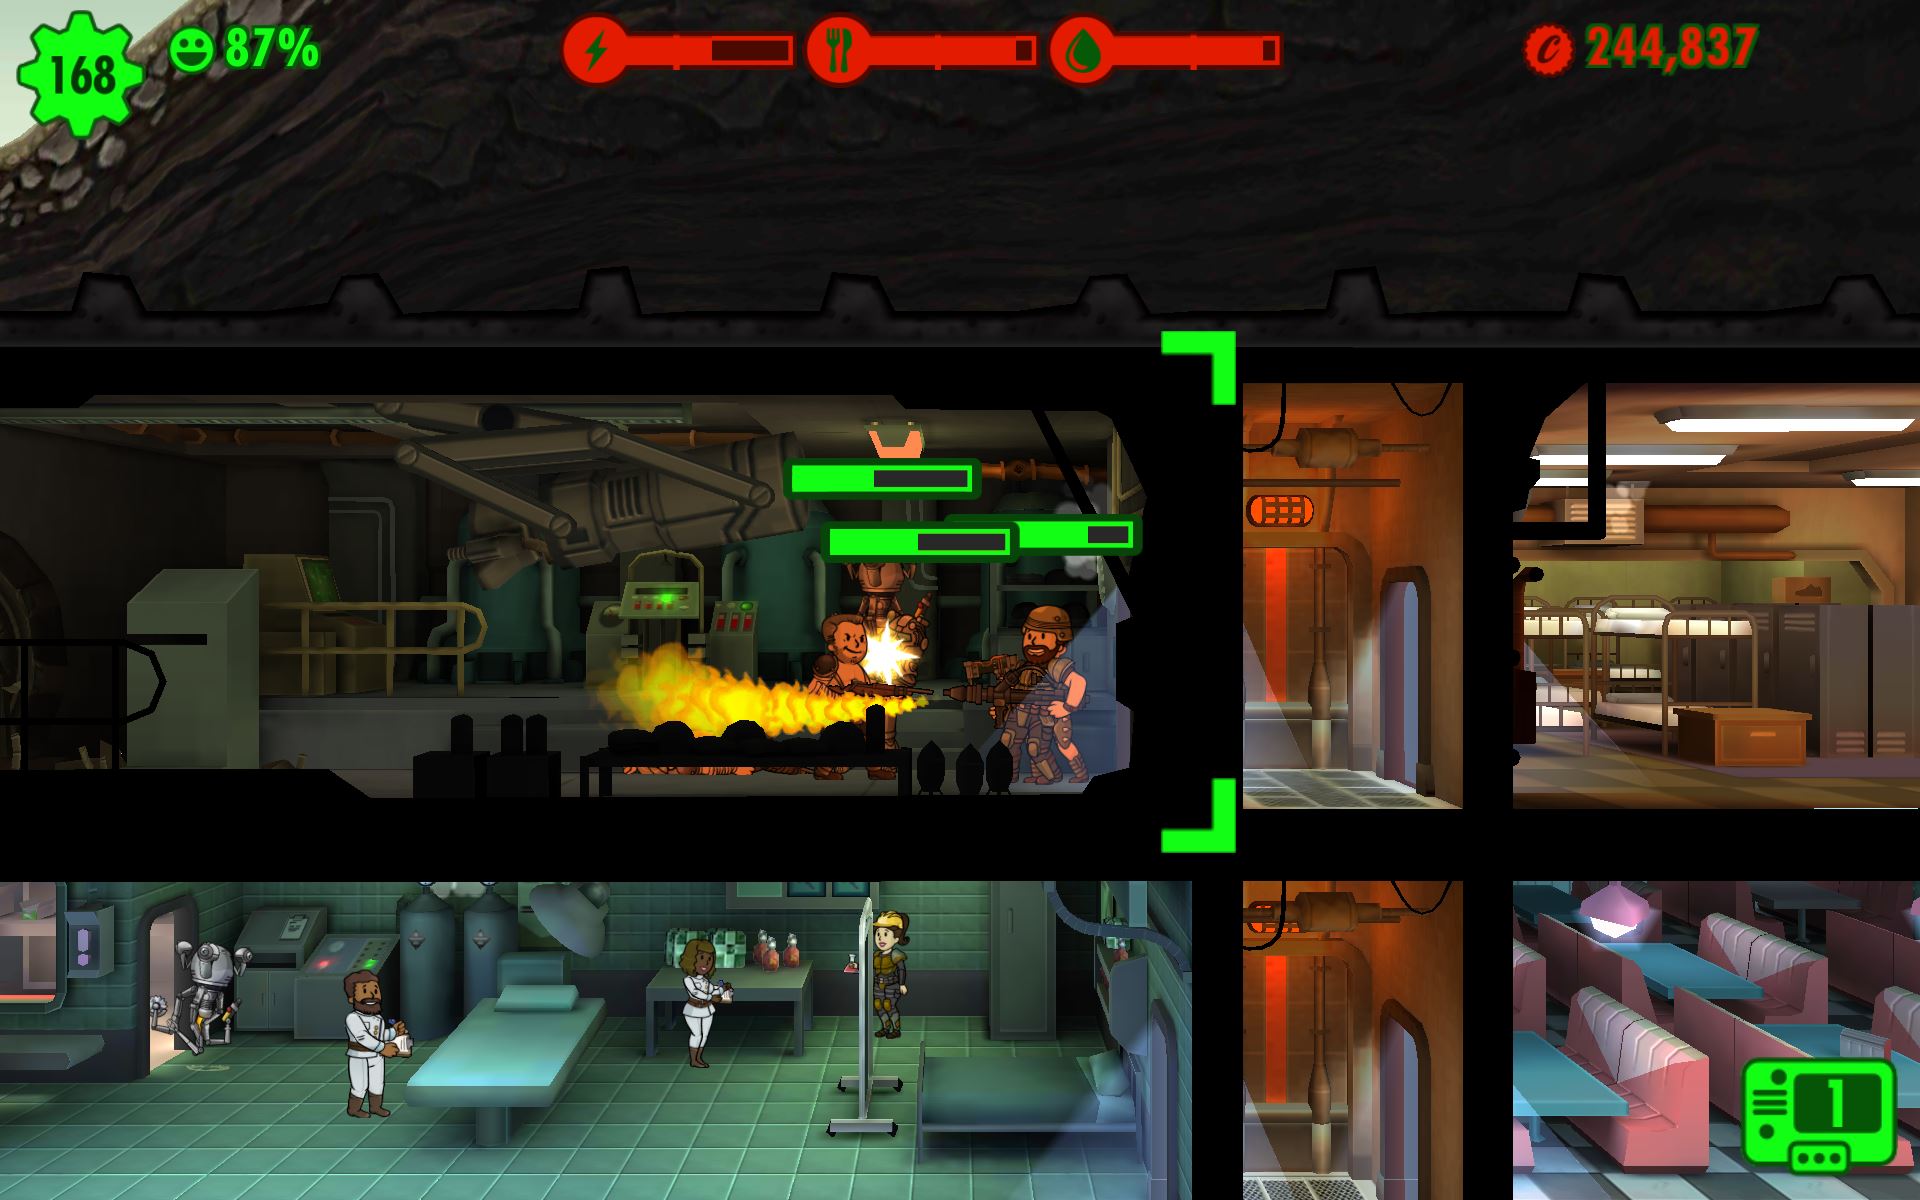 How to heal a Mr. Handy in Fallout shelter